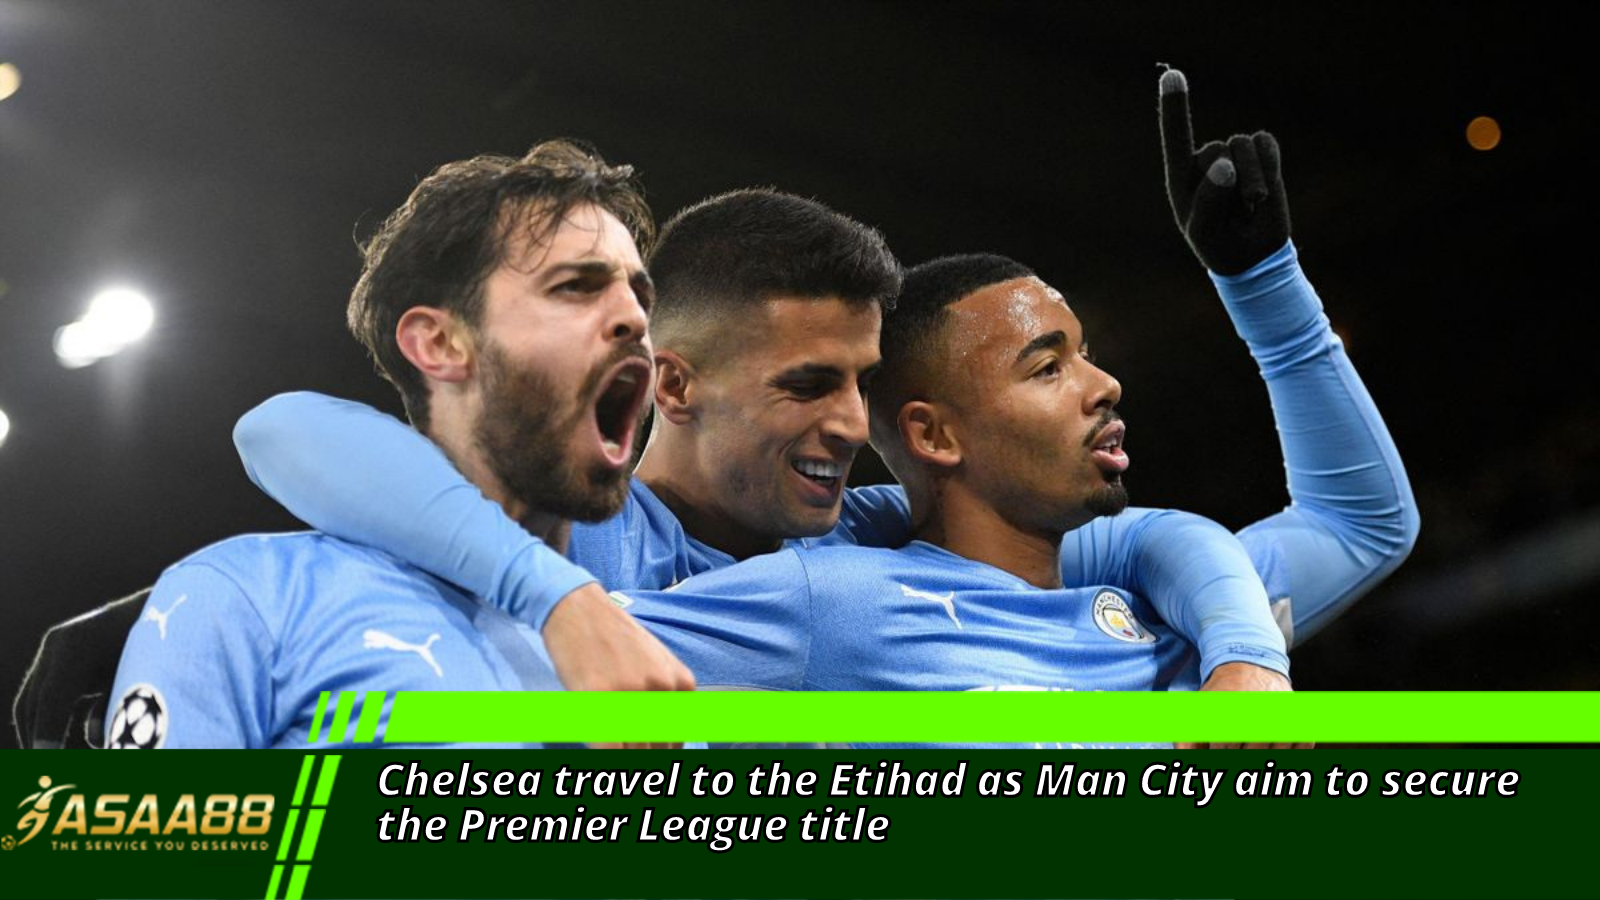 Chelsea travel to the Etihad as Man City aim to secure the Premier League title